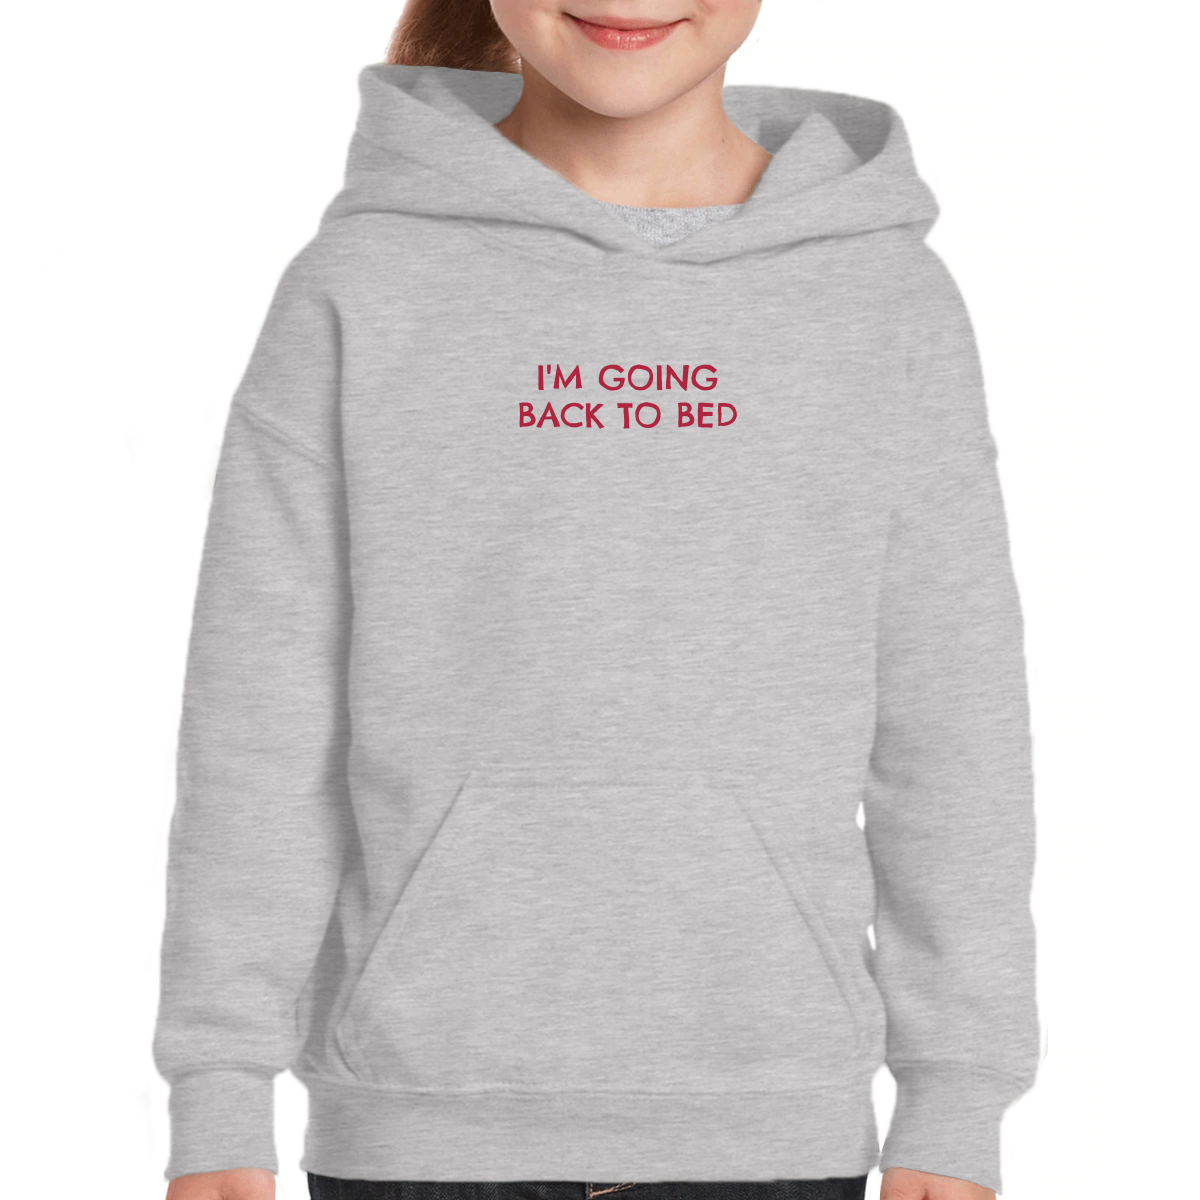 I'm Going Back to Bed Kids Hoodie | Gray